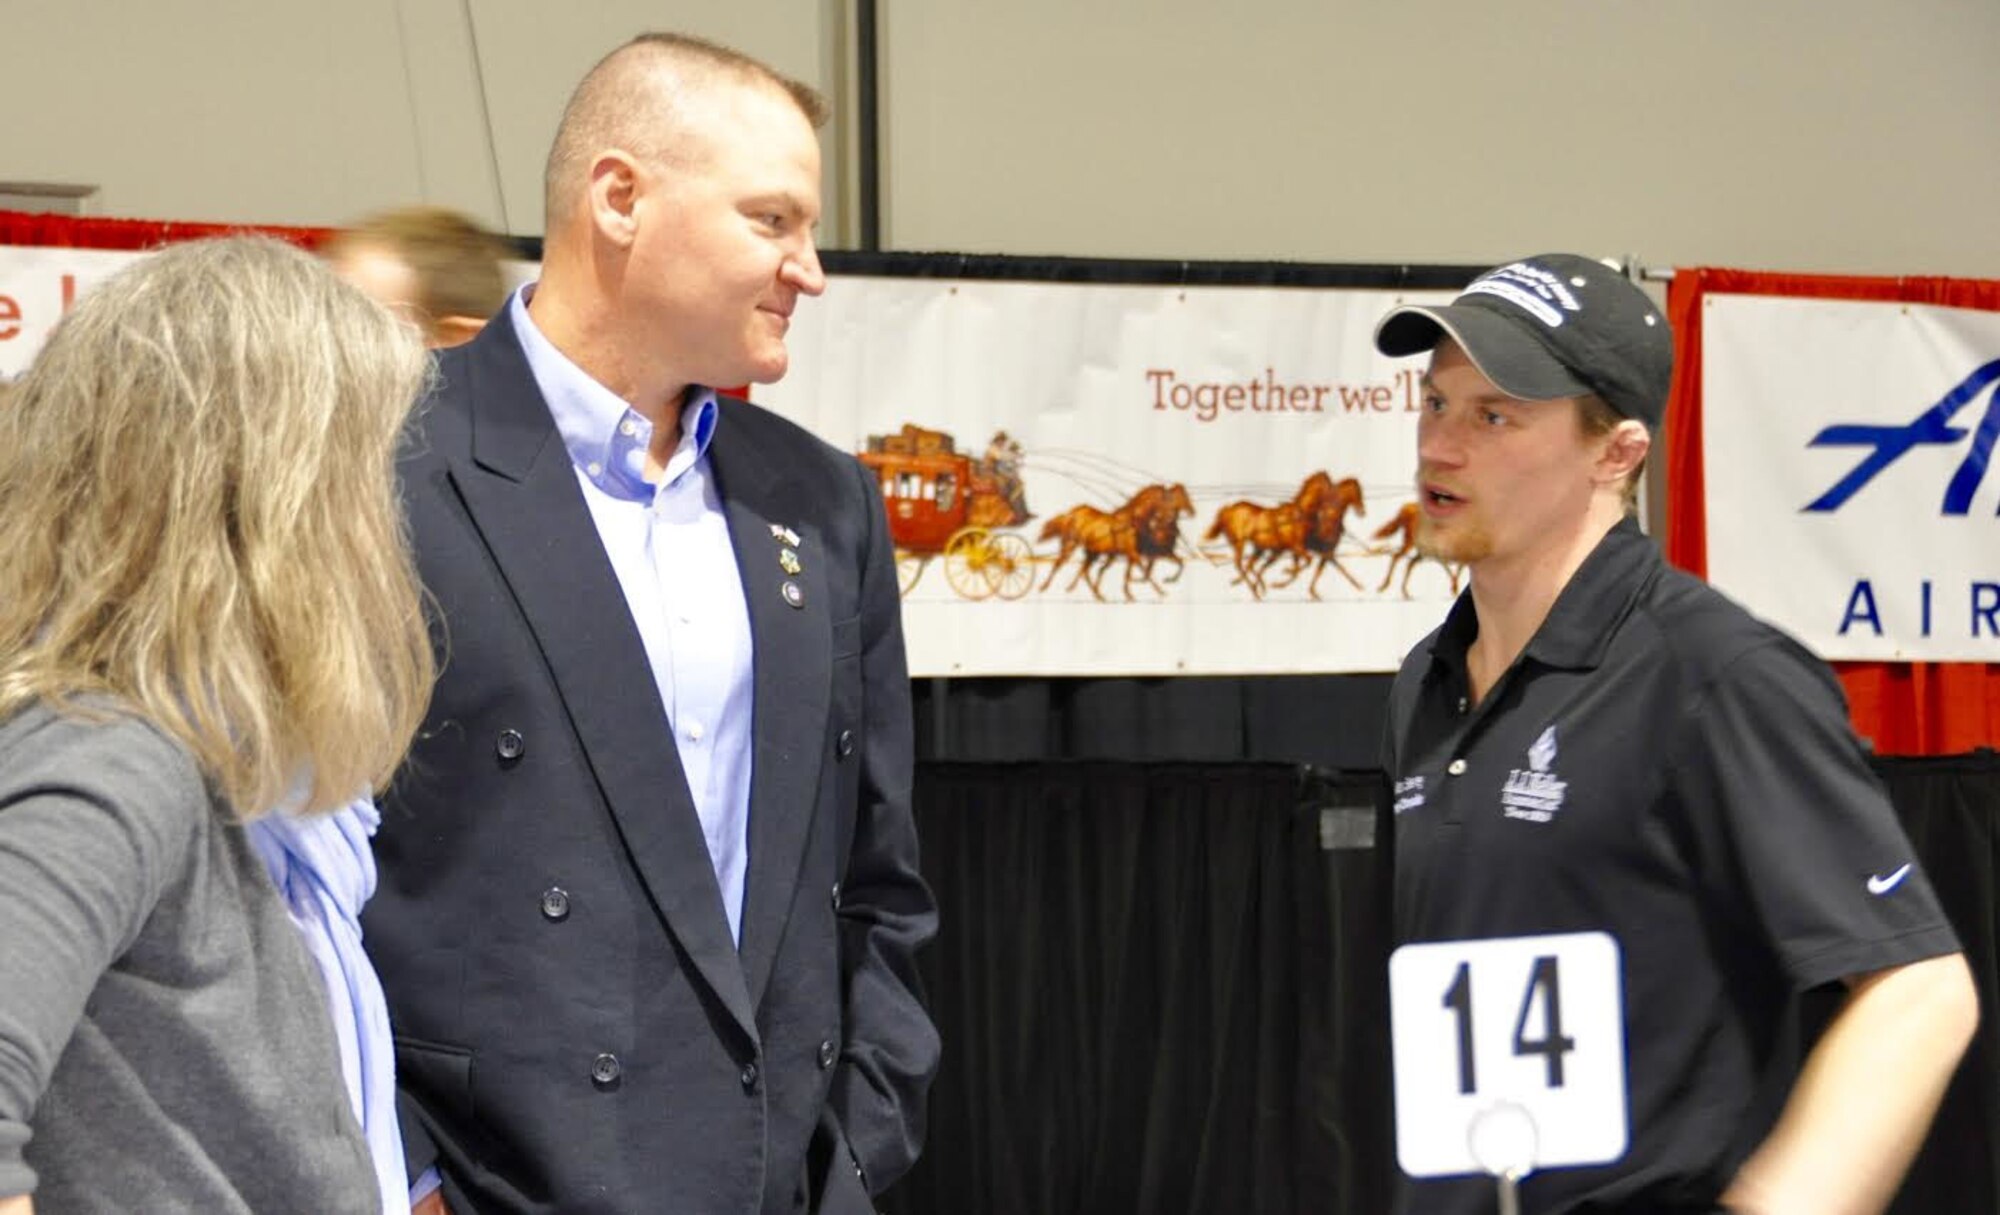 Col. Chris Ogren, 477th Fighter Group deputy commander and his wife, Amy Ogren, speak with Dallas Seavey, three-time Iditarod champion, during the Mushers’ Banquet in Anchorage, Alaska, March 3, 2016. Seavey visited with Reservists and toured an F-22 at Joint Base Elmendorf-Richardson, Alaska, March 2. The Iditarod is a 1,000-mile sled dog race across the rugged terrain of Alaska. This is the second year Air Force Reserve Recruiting has sponsored the Iditarod, which is known as “The Last Great Race on Earth.” (U.S. Air Force/Tech. Sgt. Kimberly Moore) 